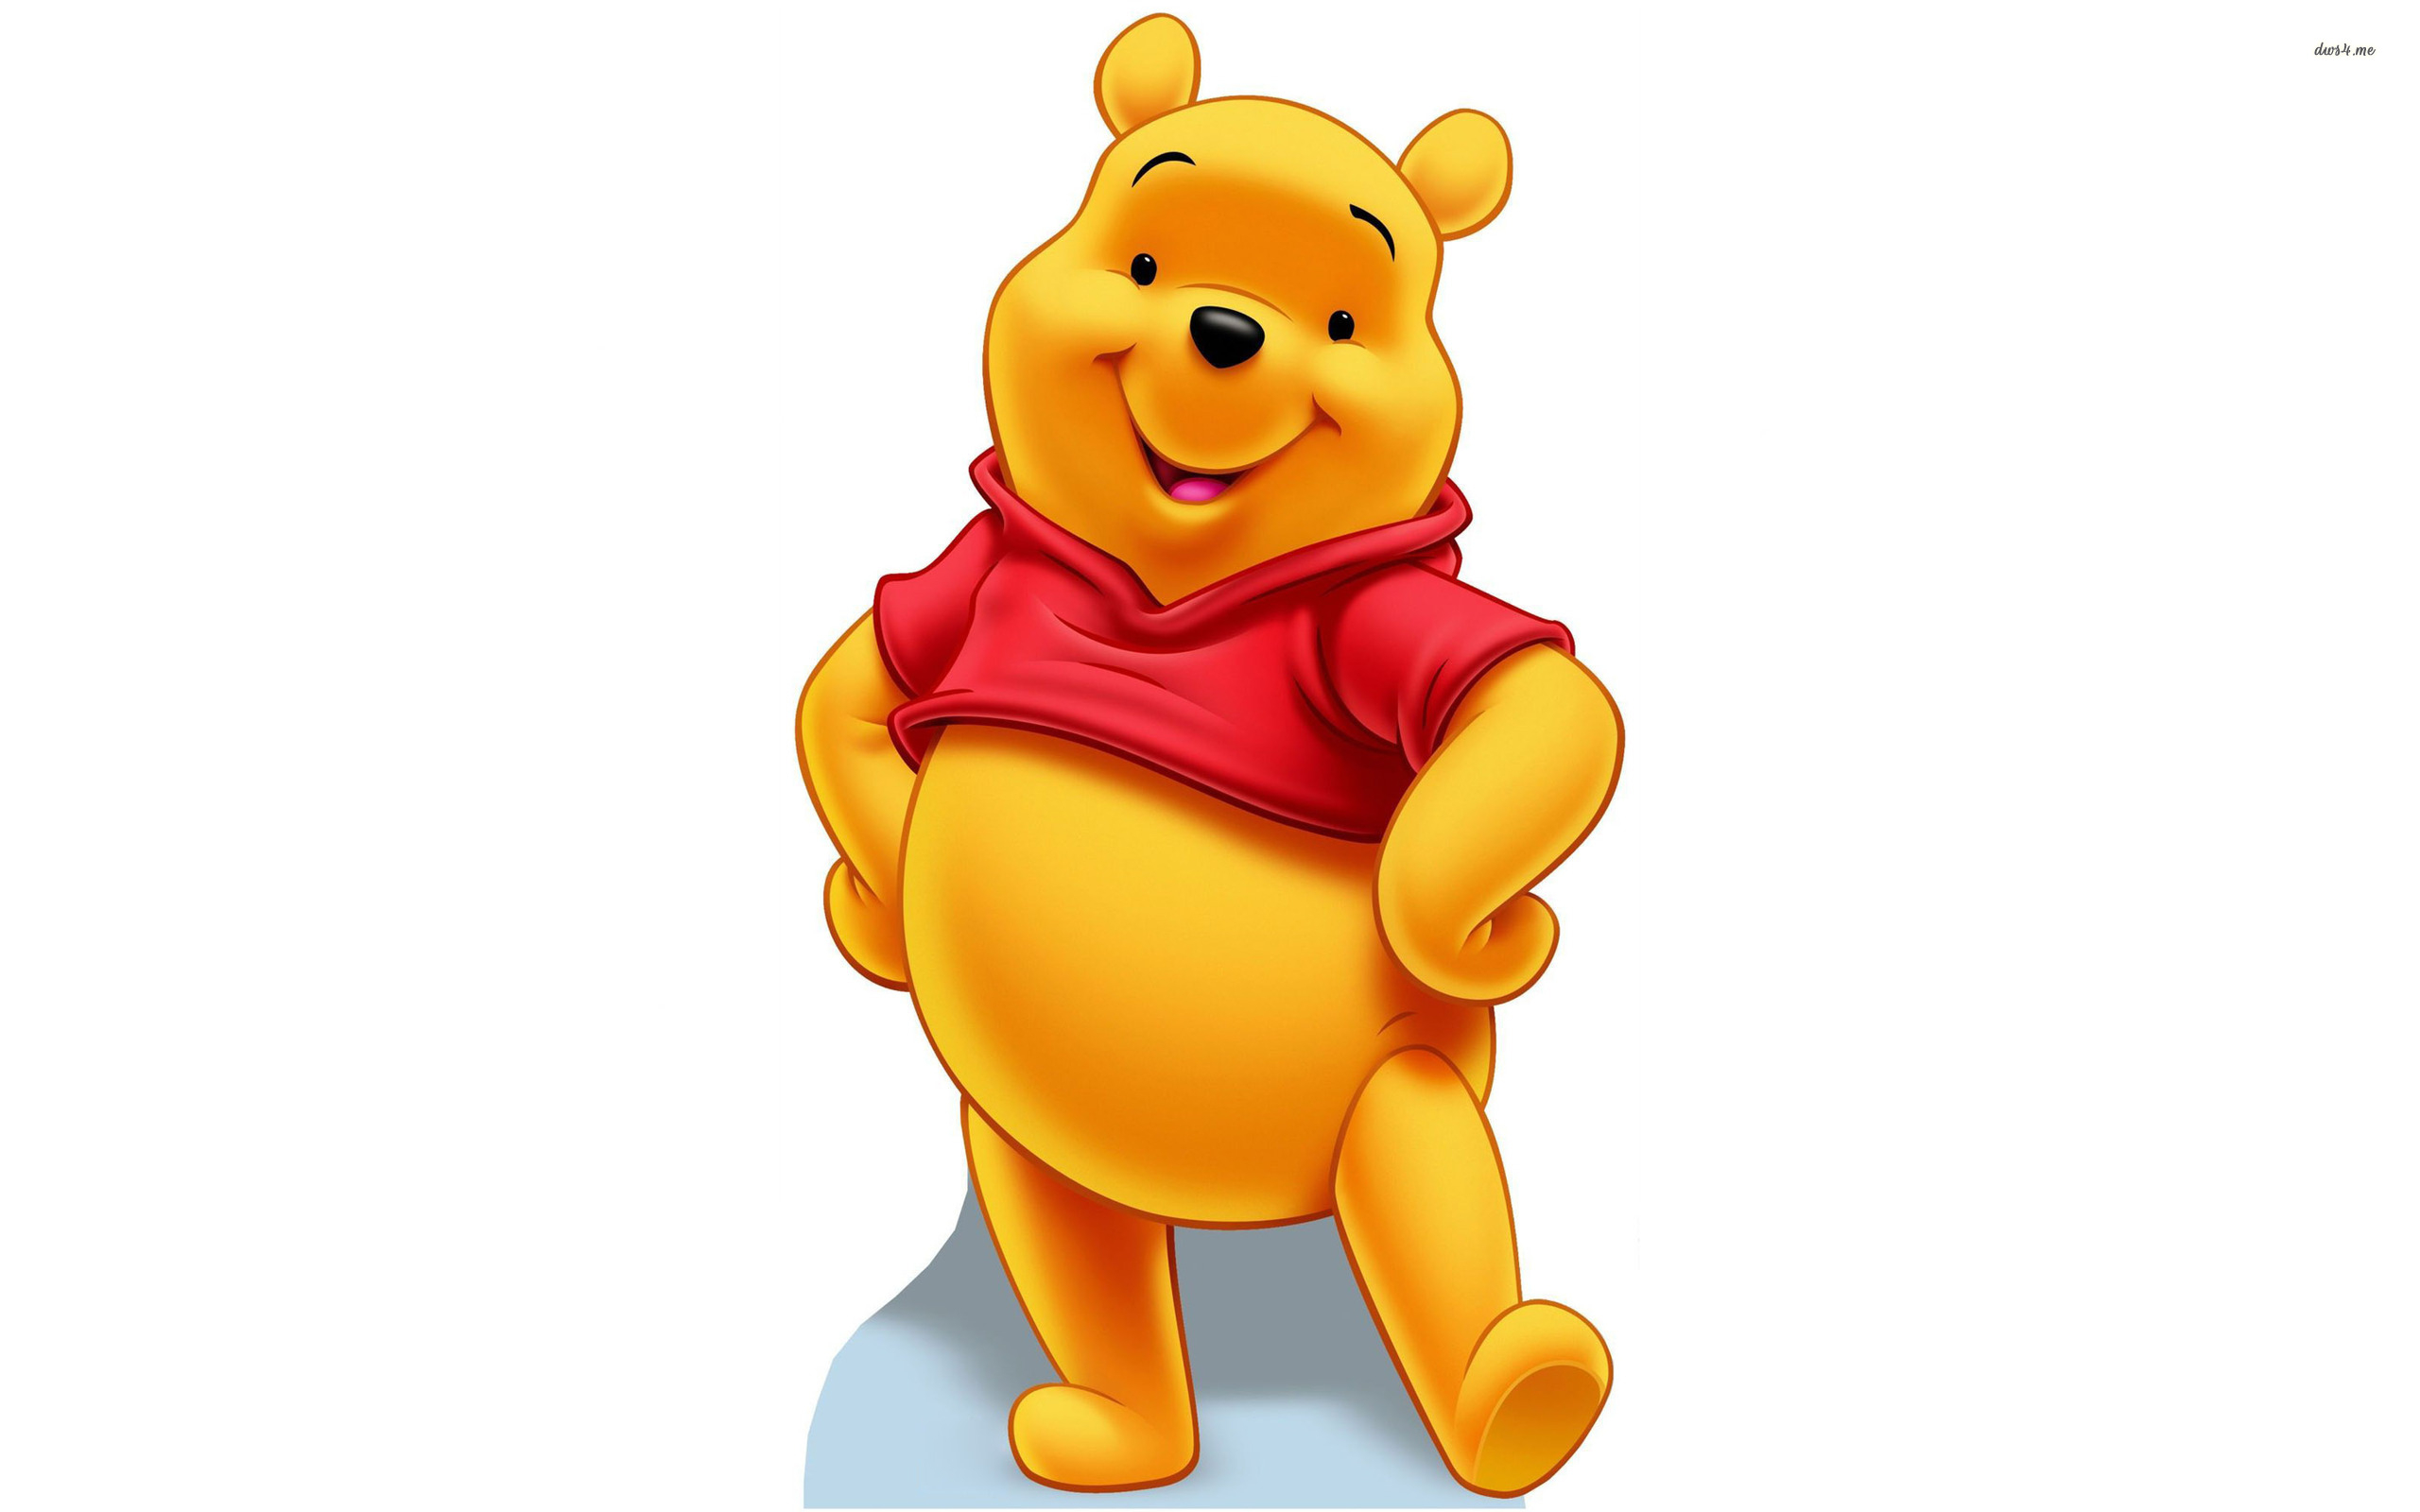 2560x1600 Here is my collection of hd winnie the pooh wallpapers Album on Imgur